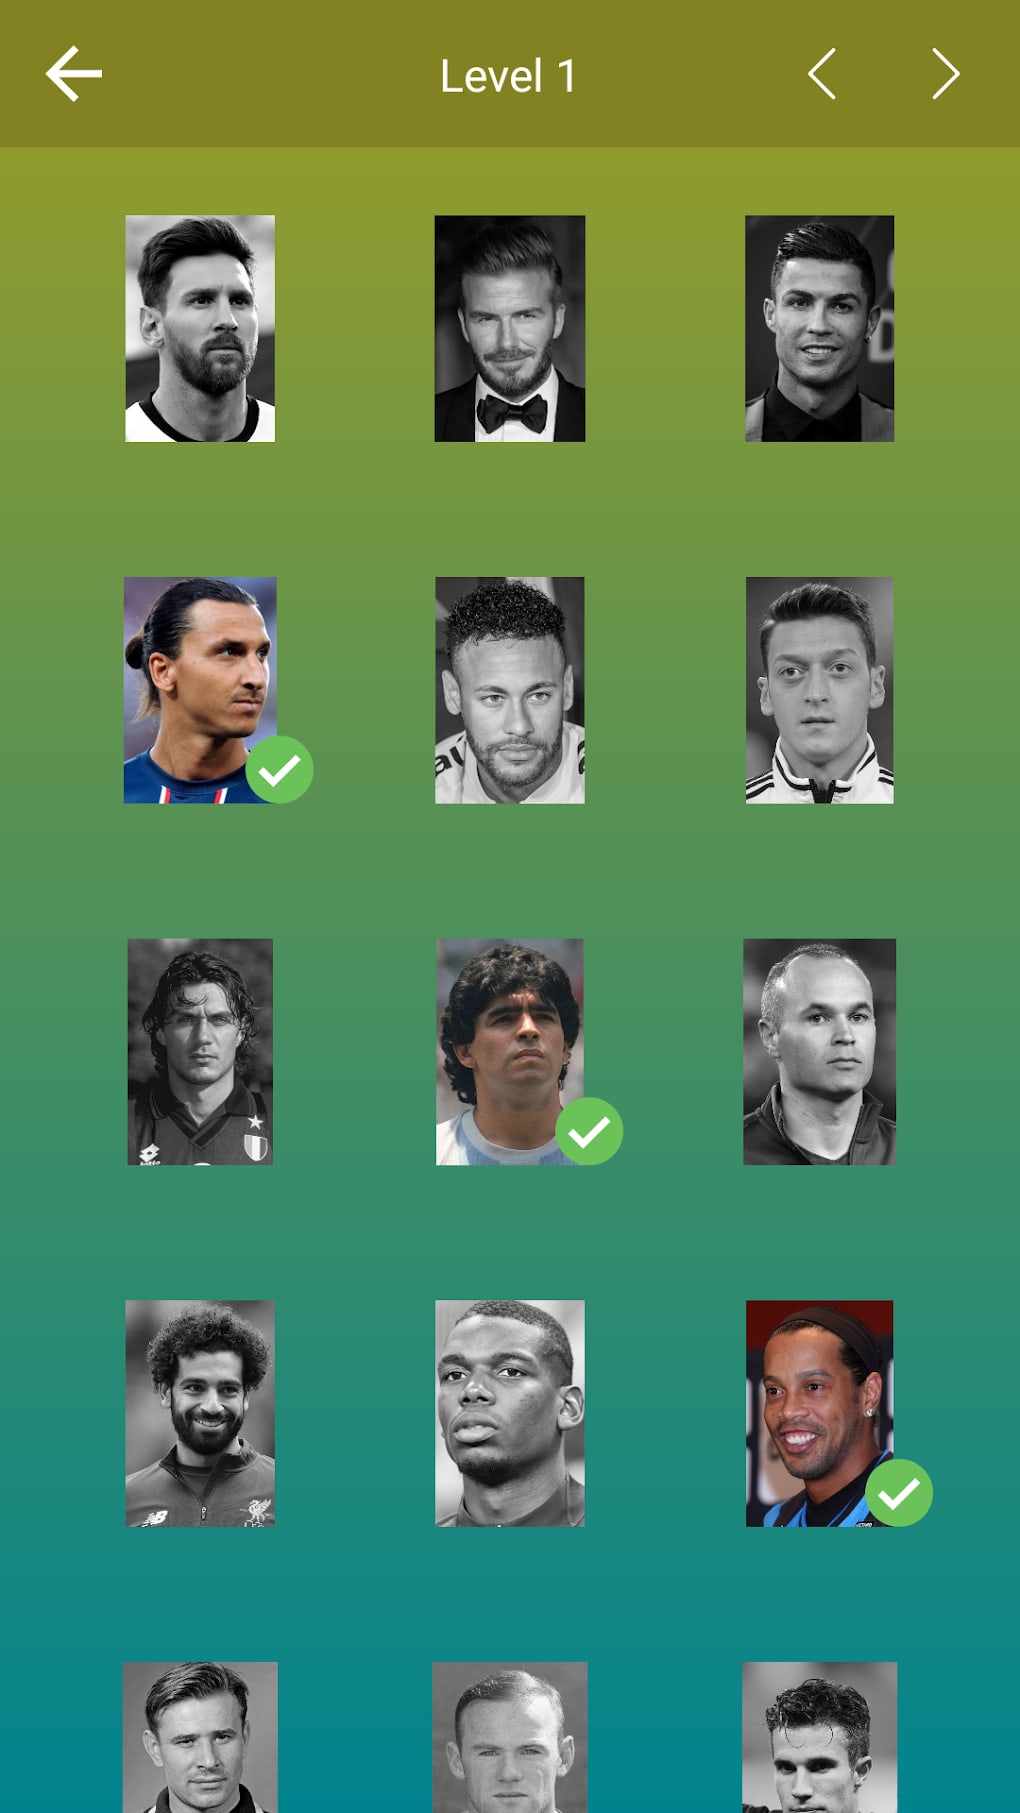 Play Guess The Soccer Player Quiz Online for Free on PC & Mobile